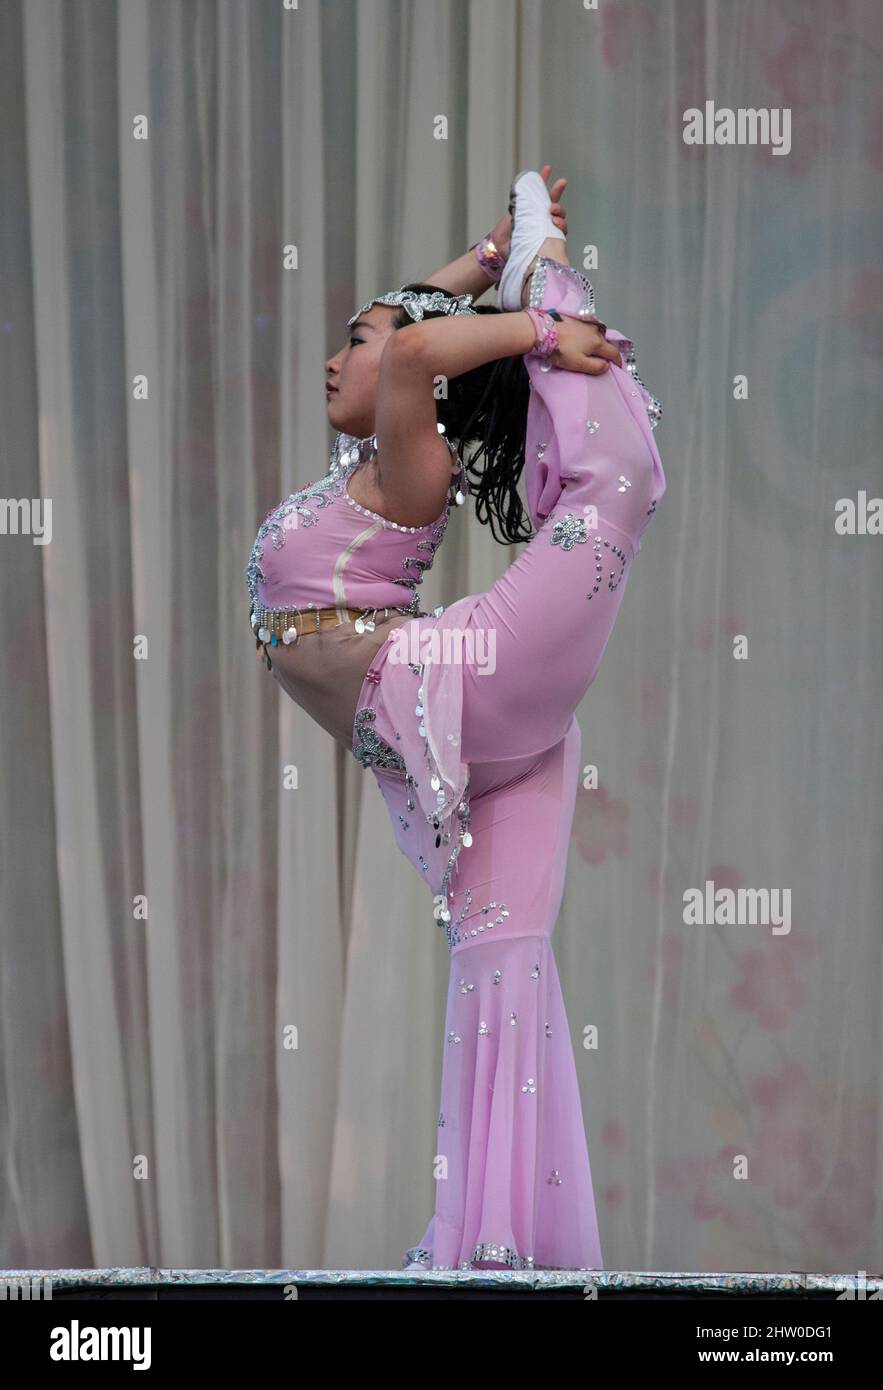 Chinese Female Contortionist, Acrobat. Stock Photo